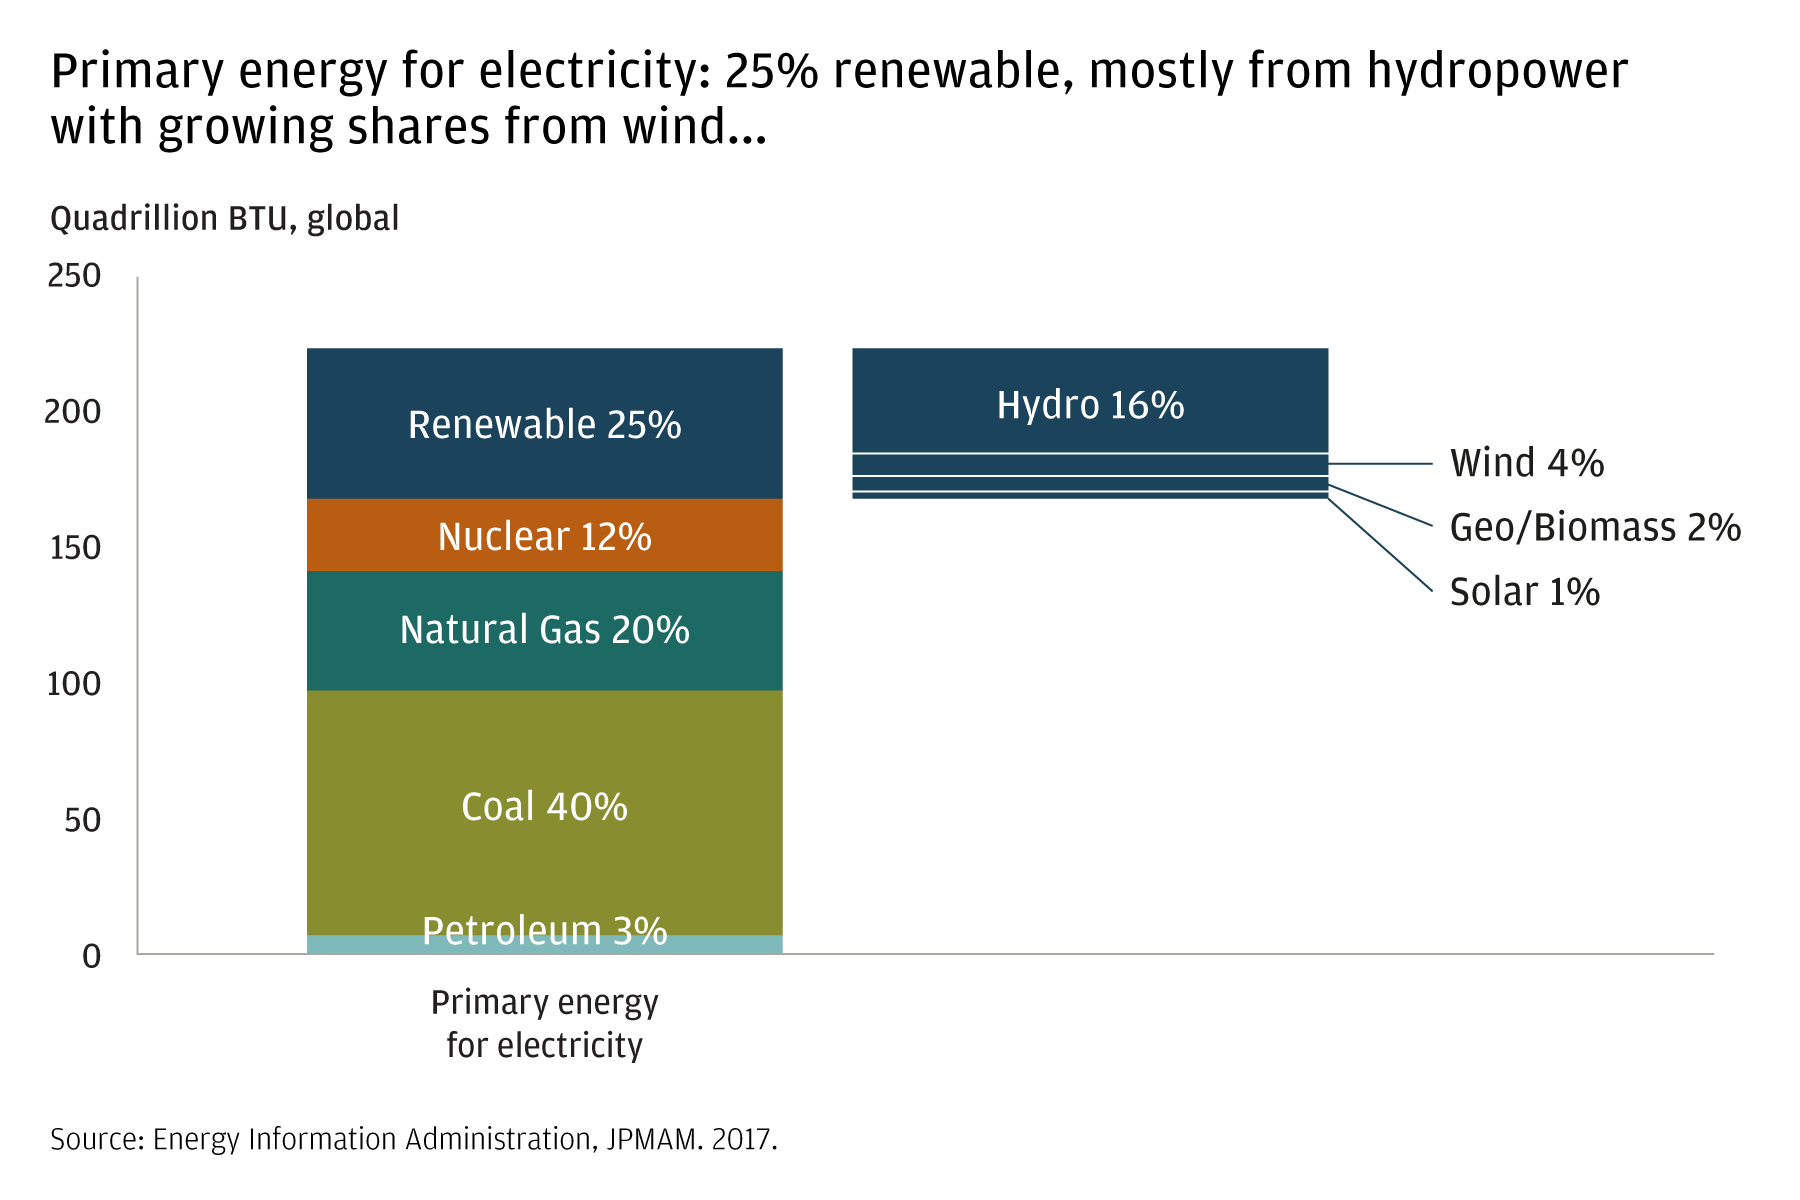 This chart breaks down the primary generators of electricity around the world. In 2017, renewable sources (25%), nuclear (12%), natural gas (20%), coal (40%) and petroleum (3%), were responsible for generating electricity. 